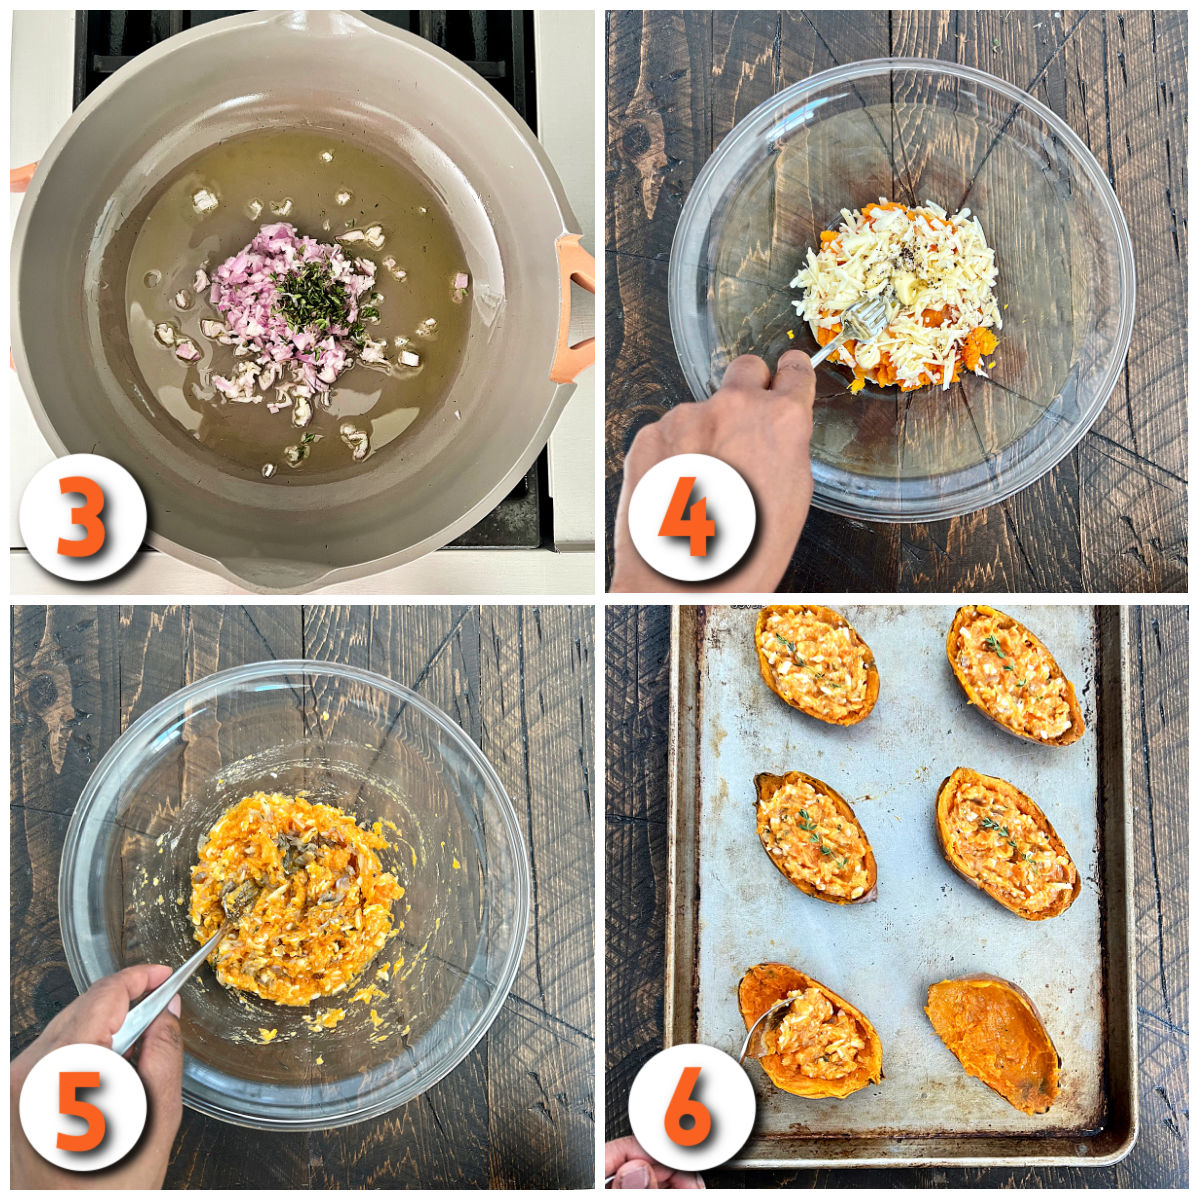 Steps 3 and 4 for Twice-baked sweet potatoes.